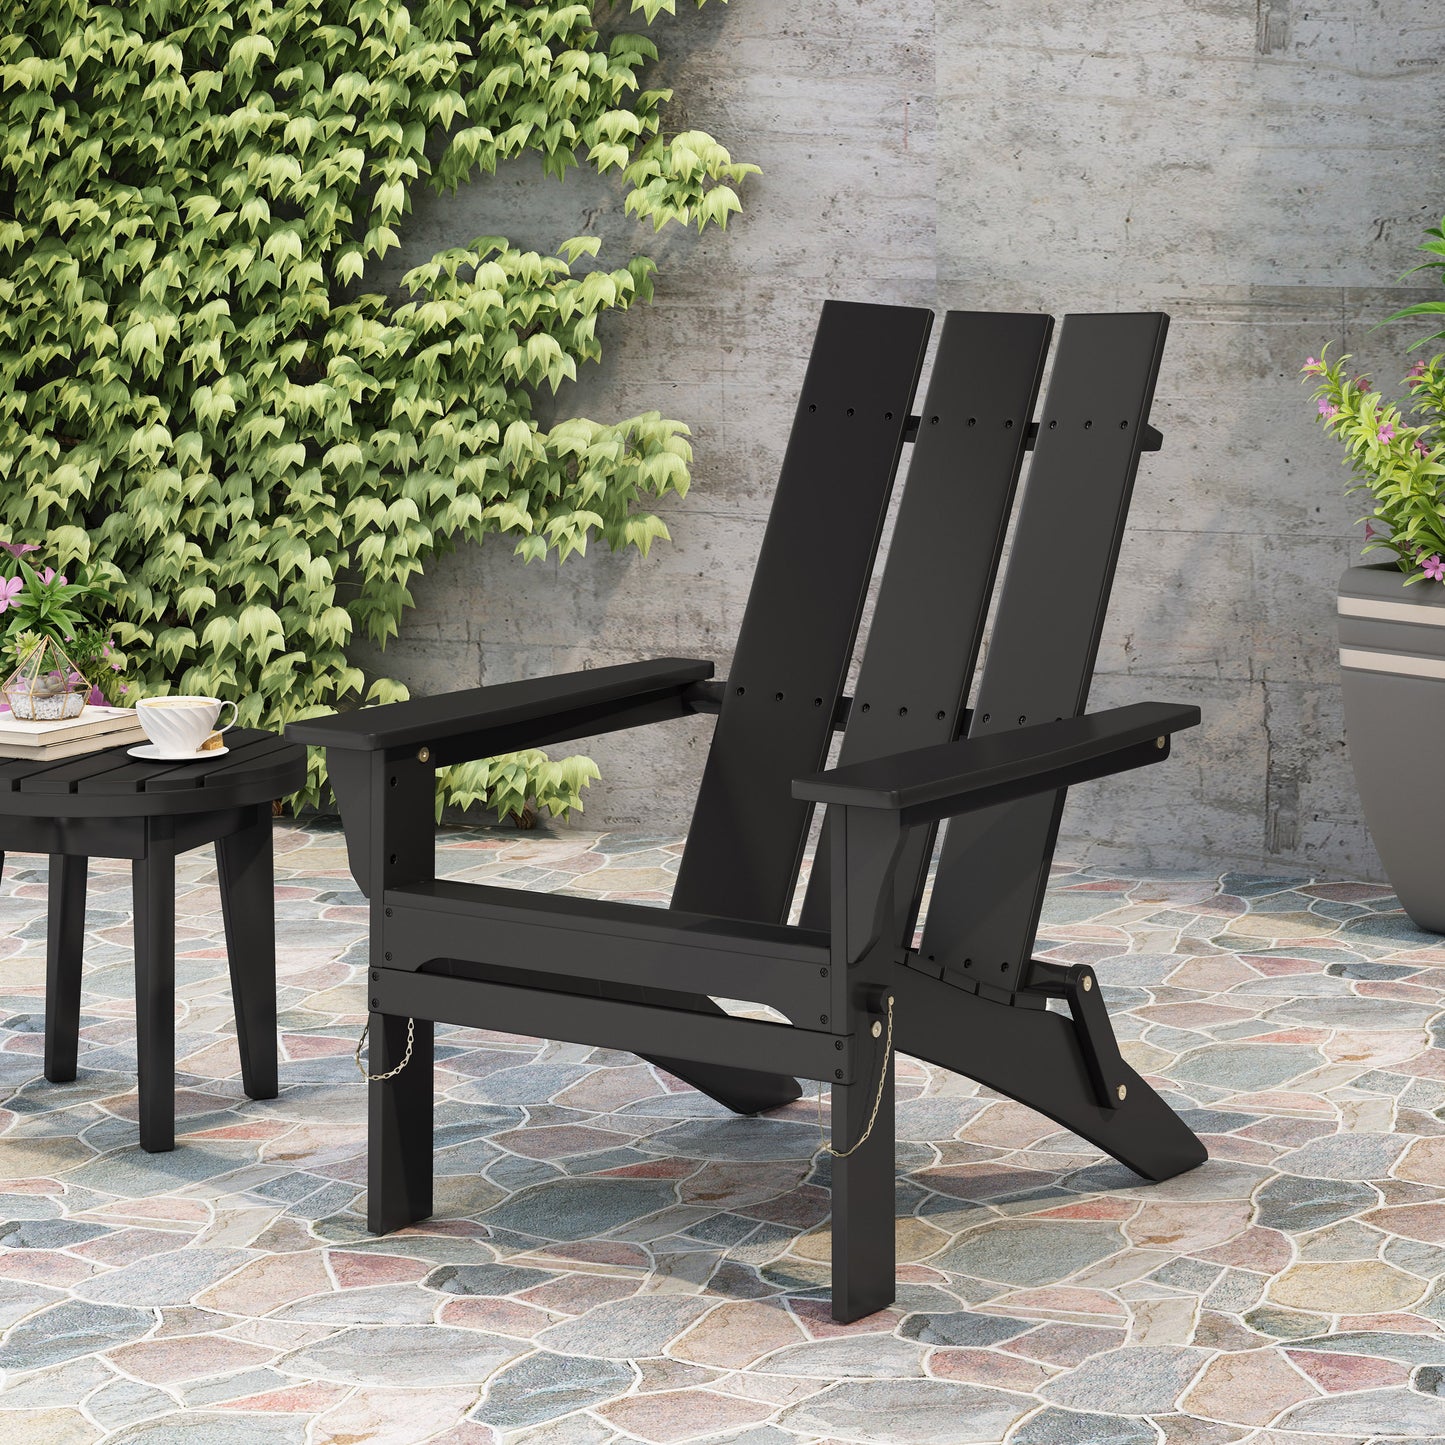 Outdoor Classic Pure Black Solid Wood Adirondack Chair Garden Lounge Chair Foldable